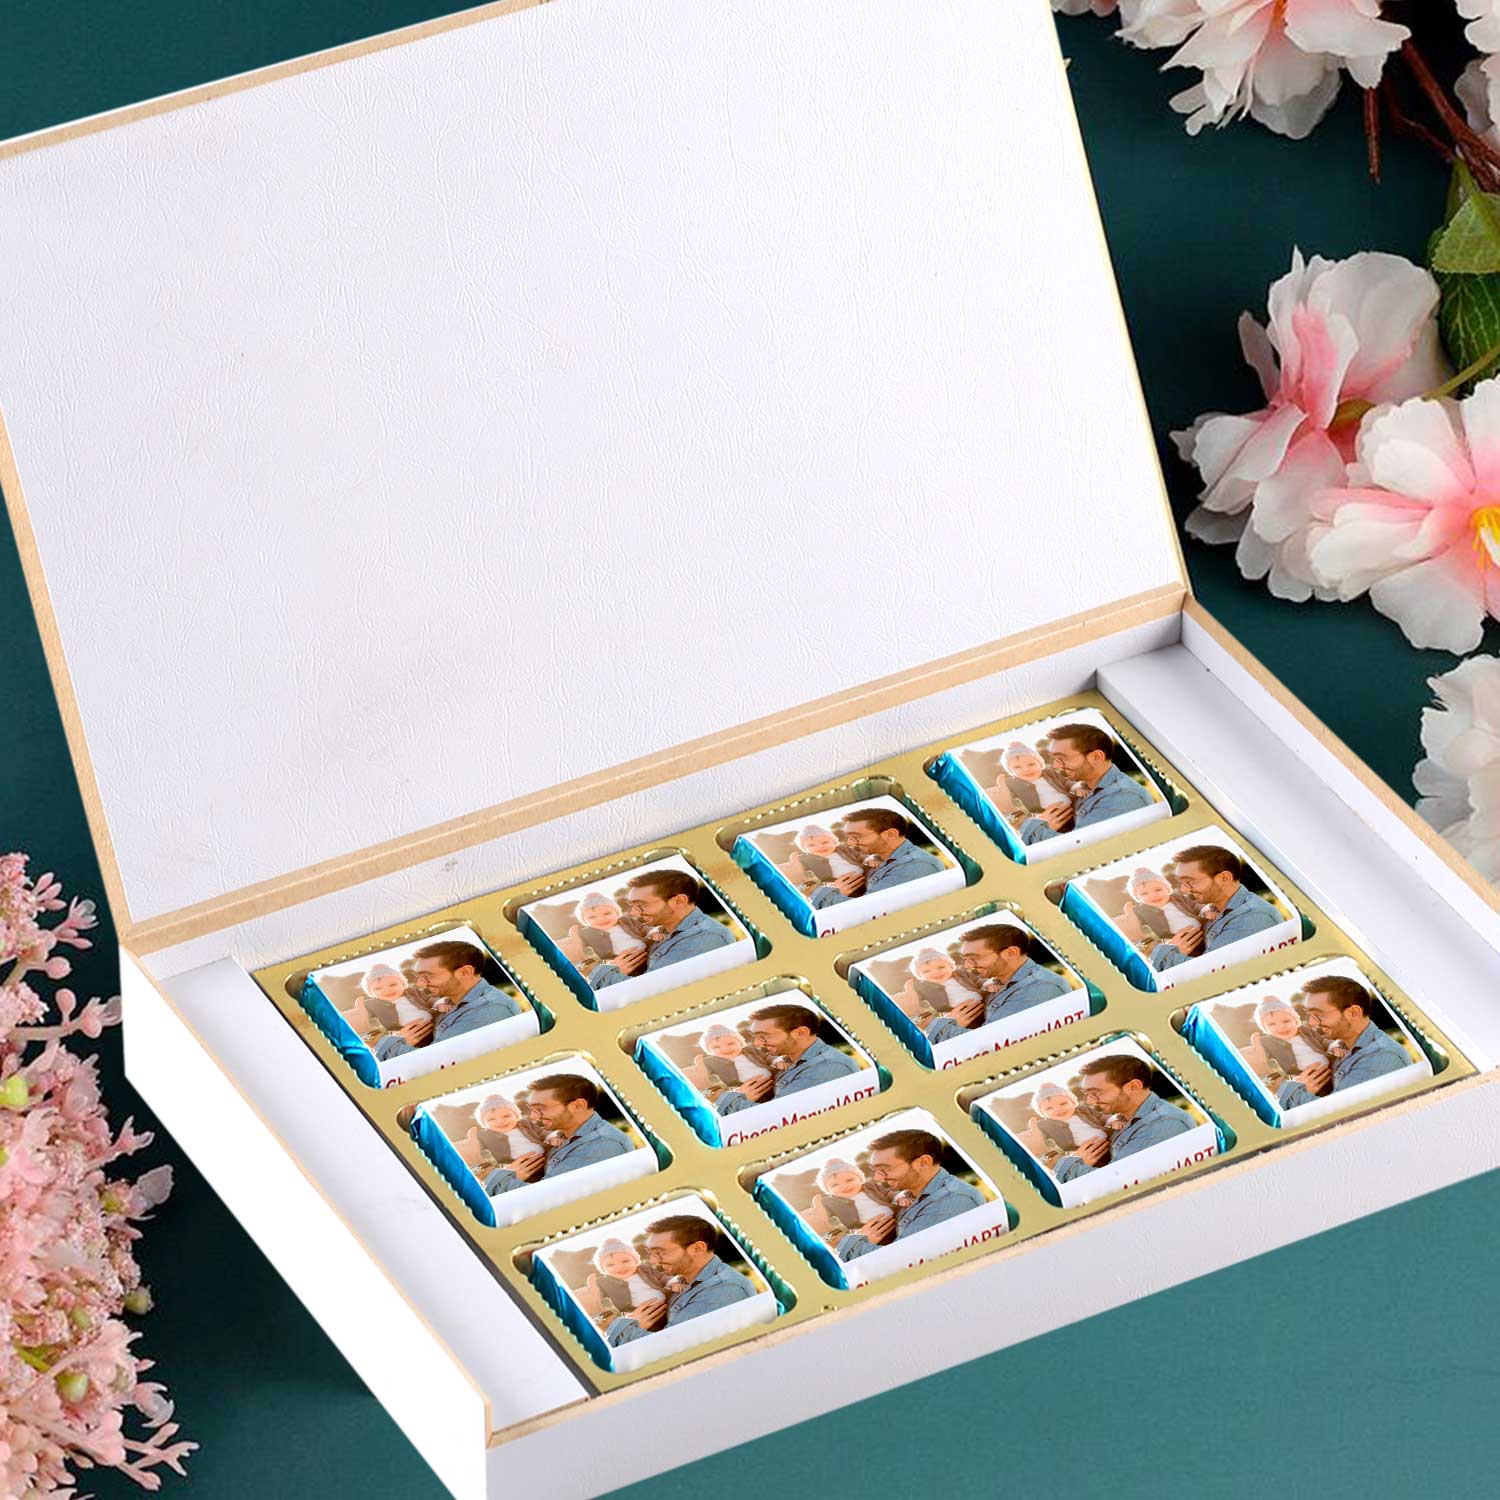 customized white wooden box with all wrapper printed chocolates. There is also a personalized message printed on Message paper inside the box.